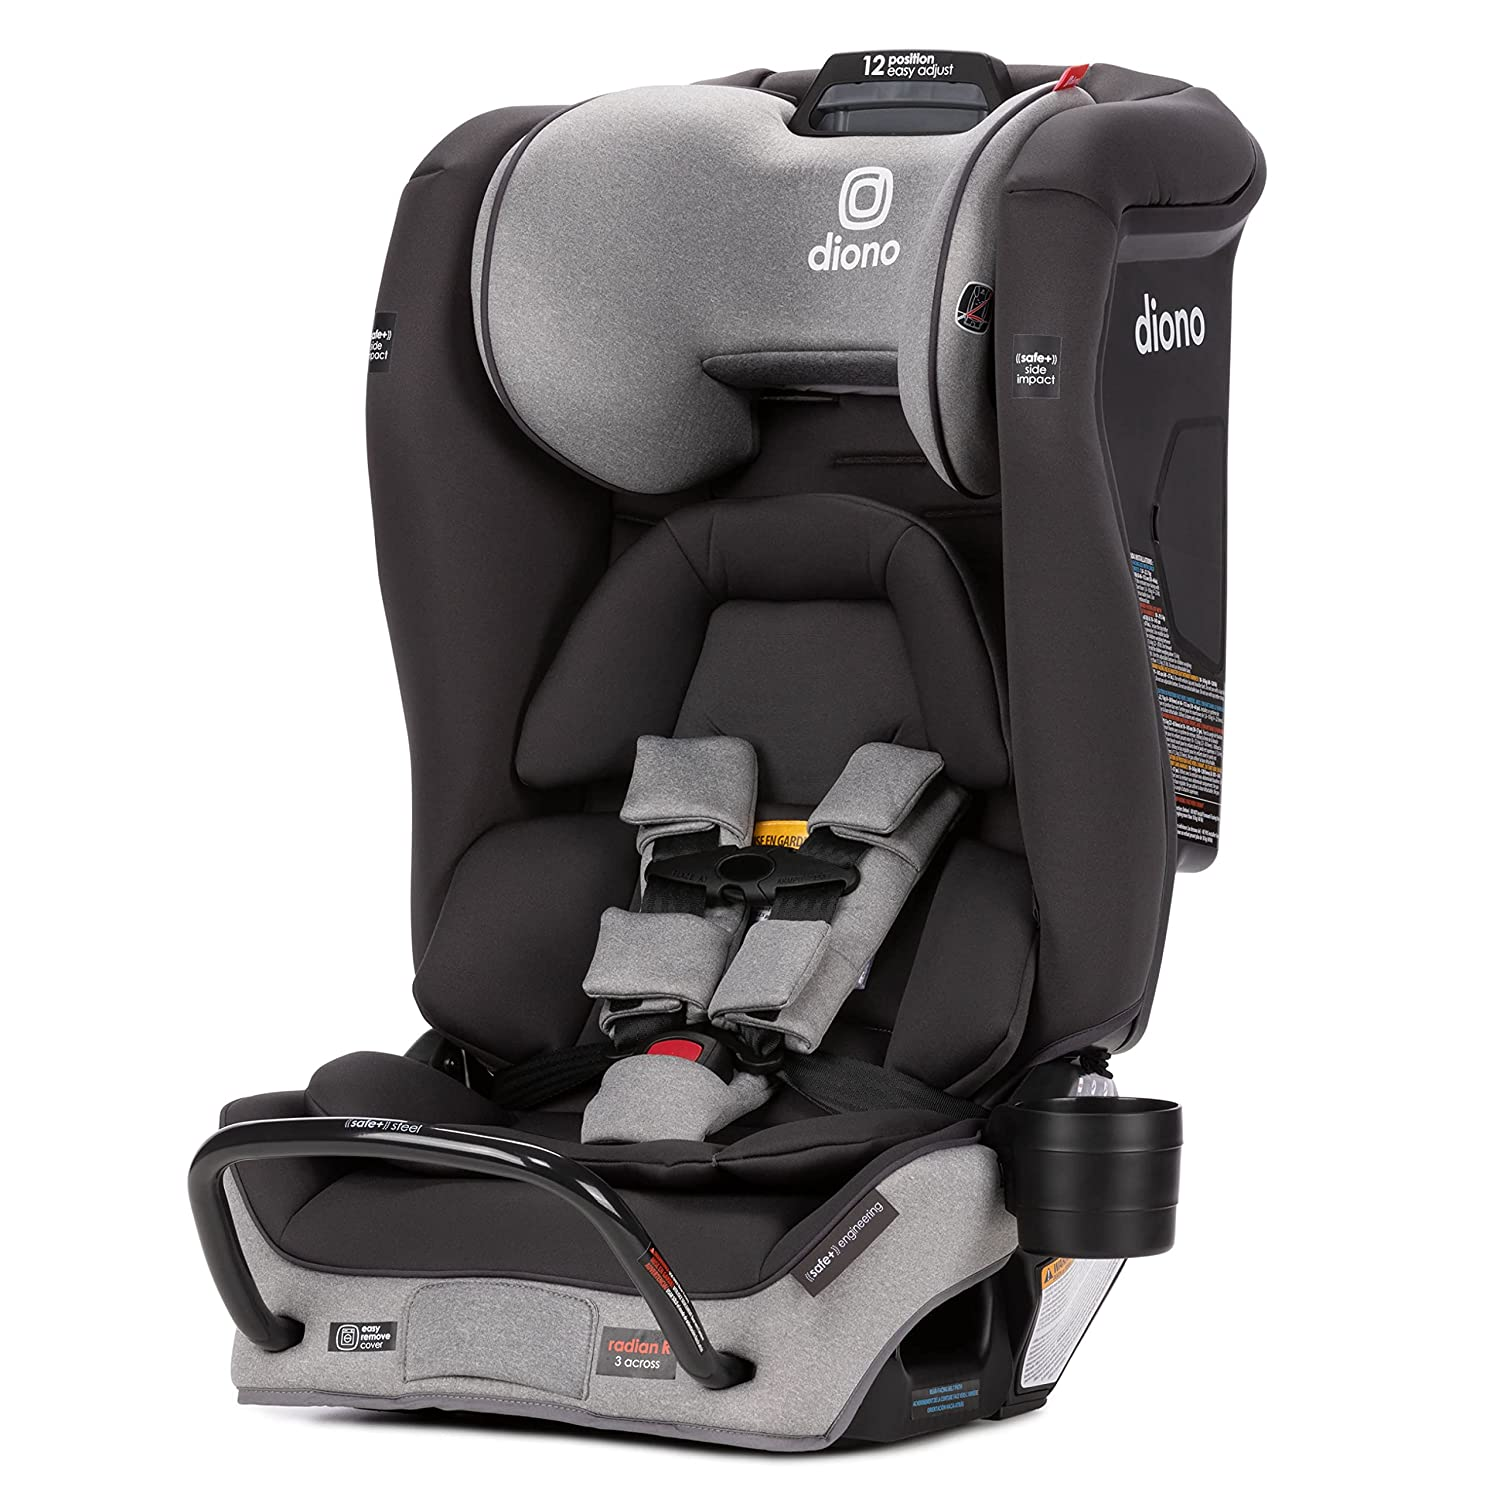 Diono Radian: Best Overall Convertible Car Seat for Tall Toddlers